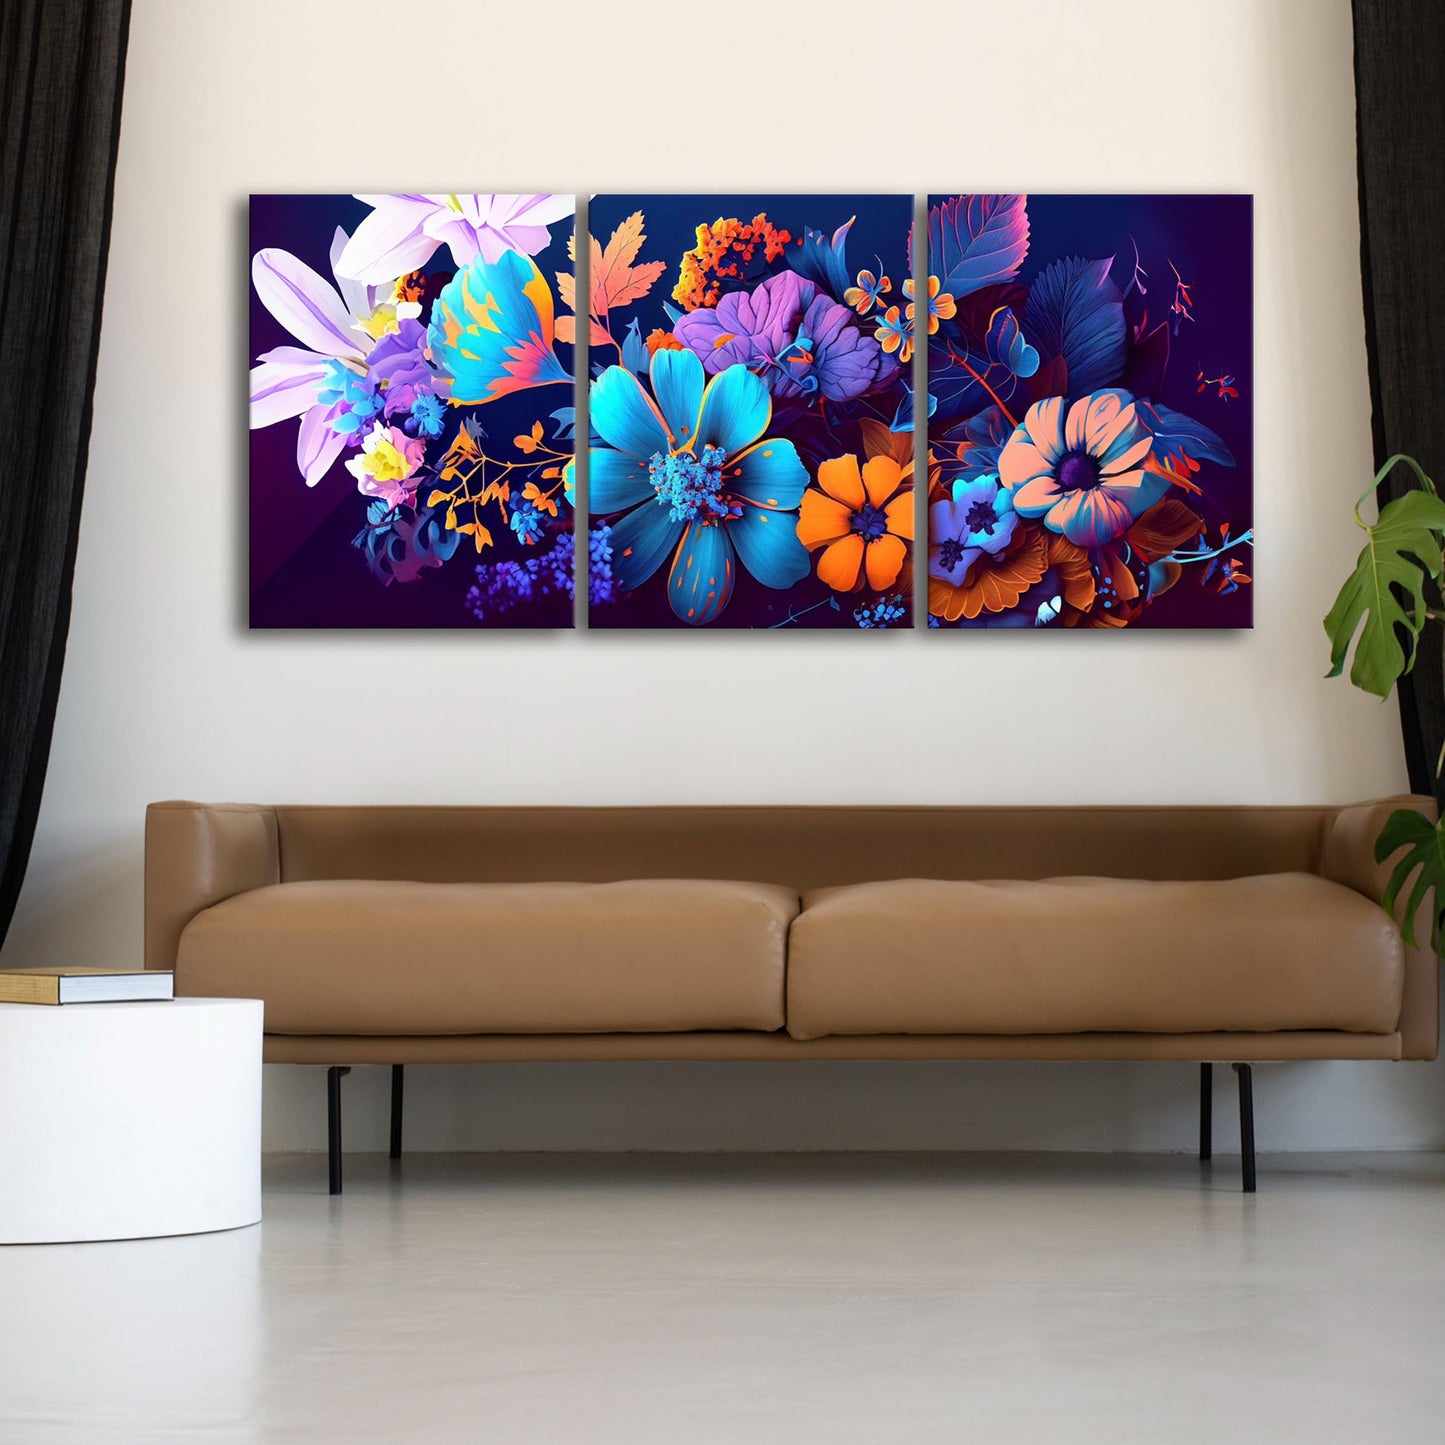 Harmony in Hues: A Lush Tapestry of Multicolored Flowers and Leaves Awakens in a Serene Bluish Purple Dreamscape - S05E107